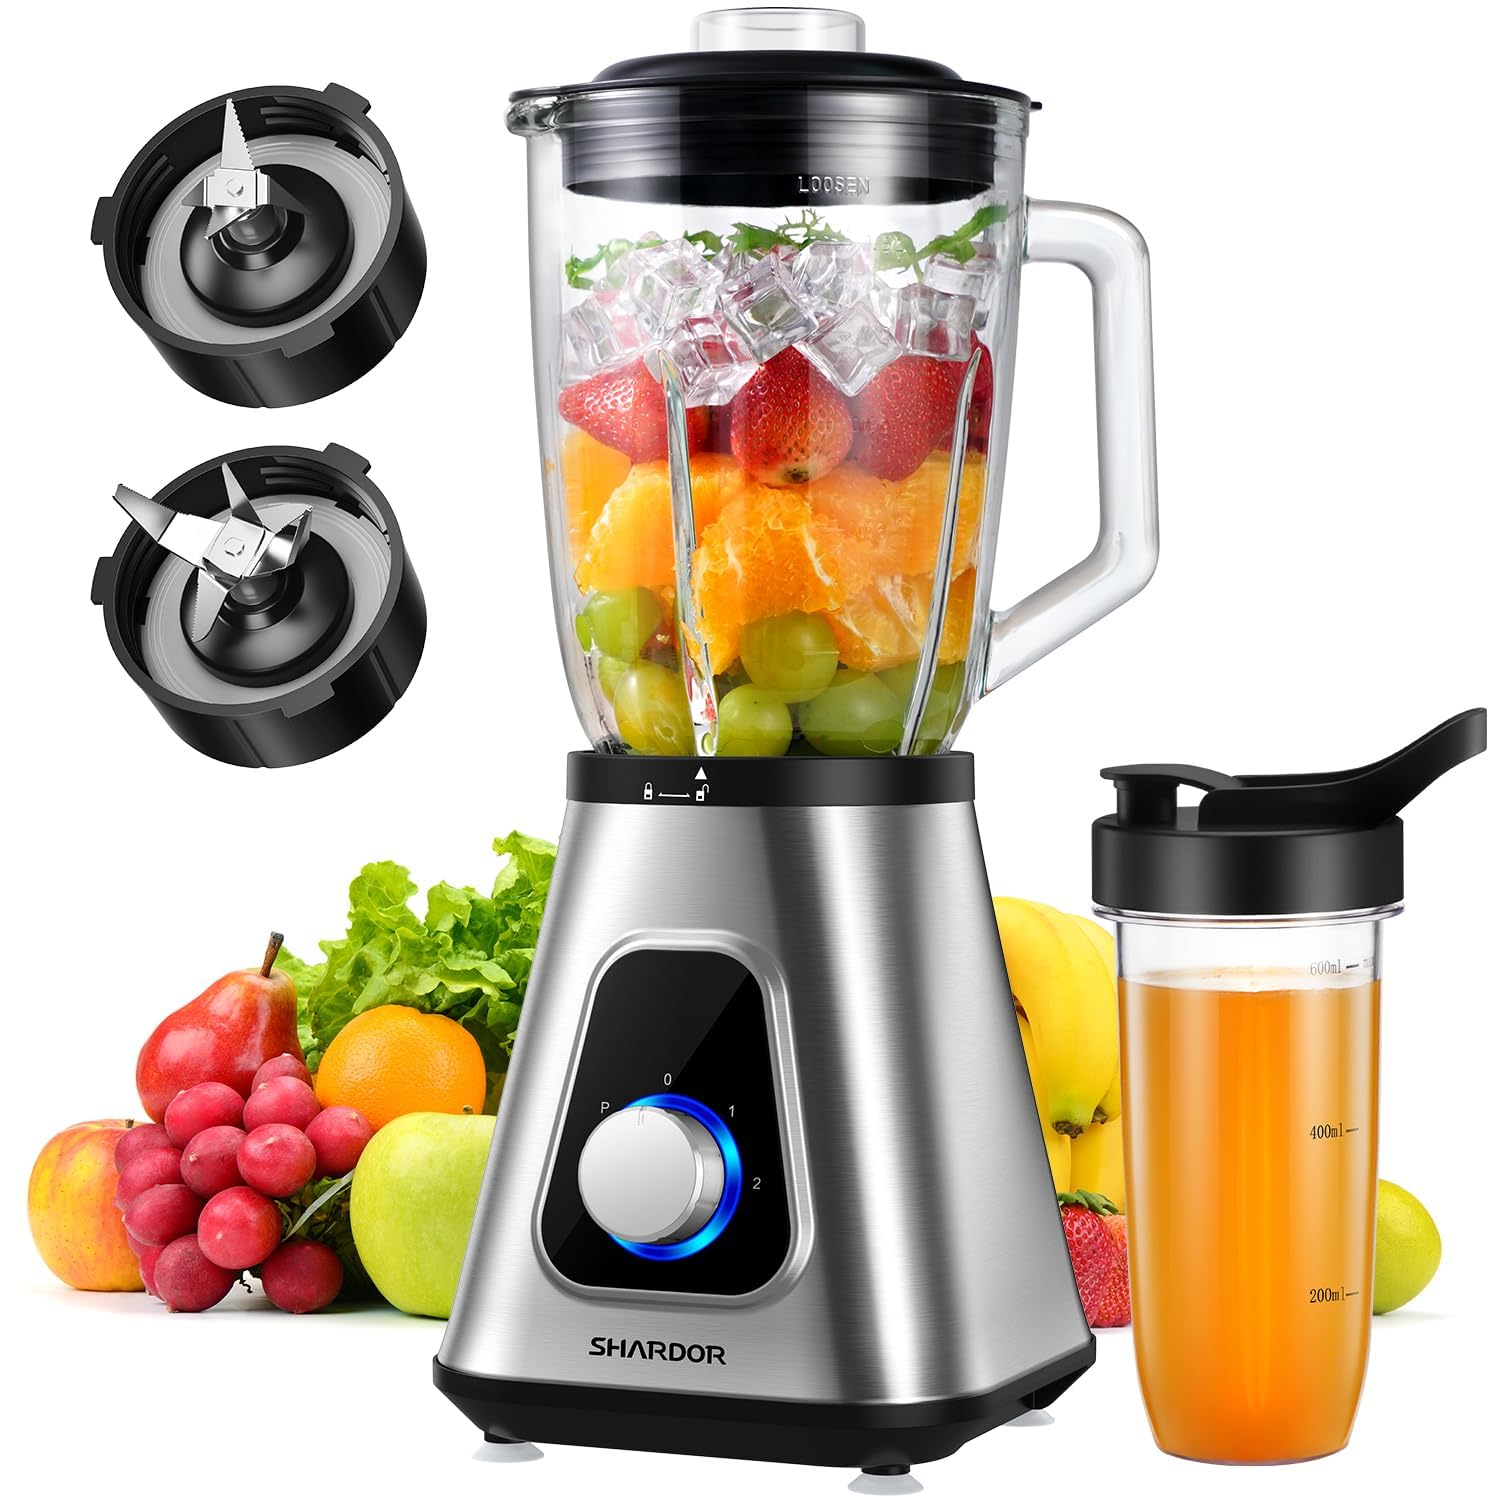 SHARDOR 1200W Blender for Shakes and Smoothies